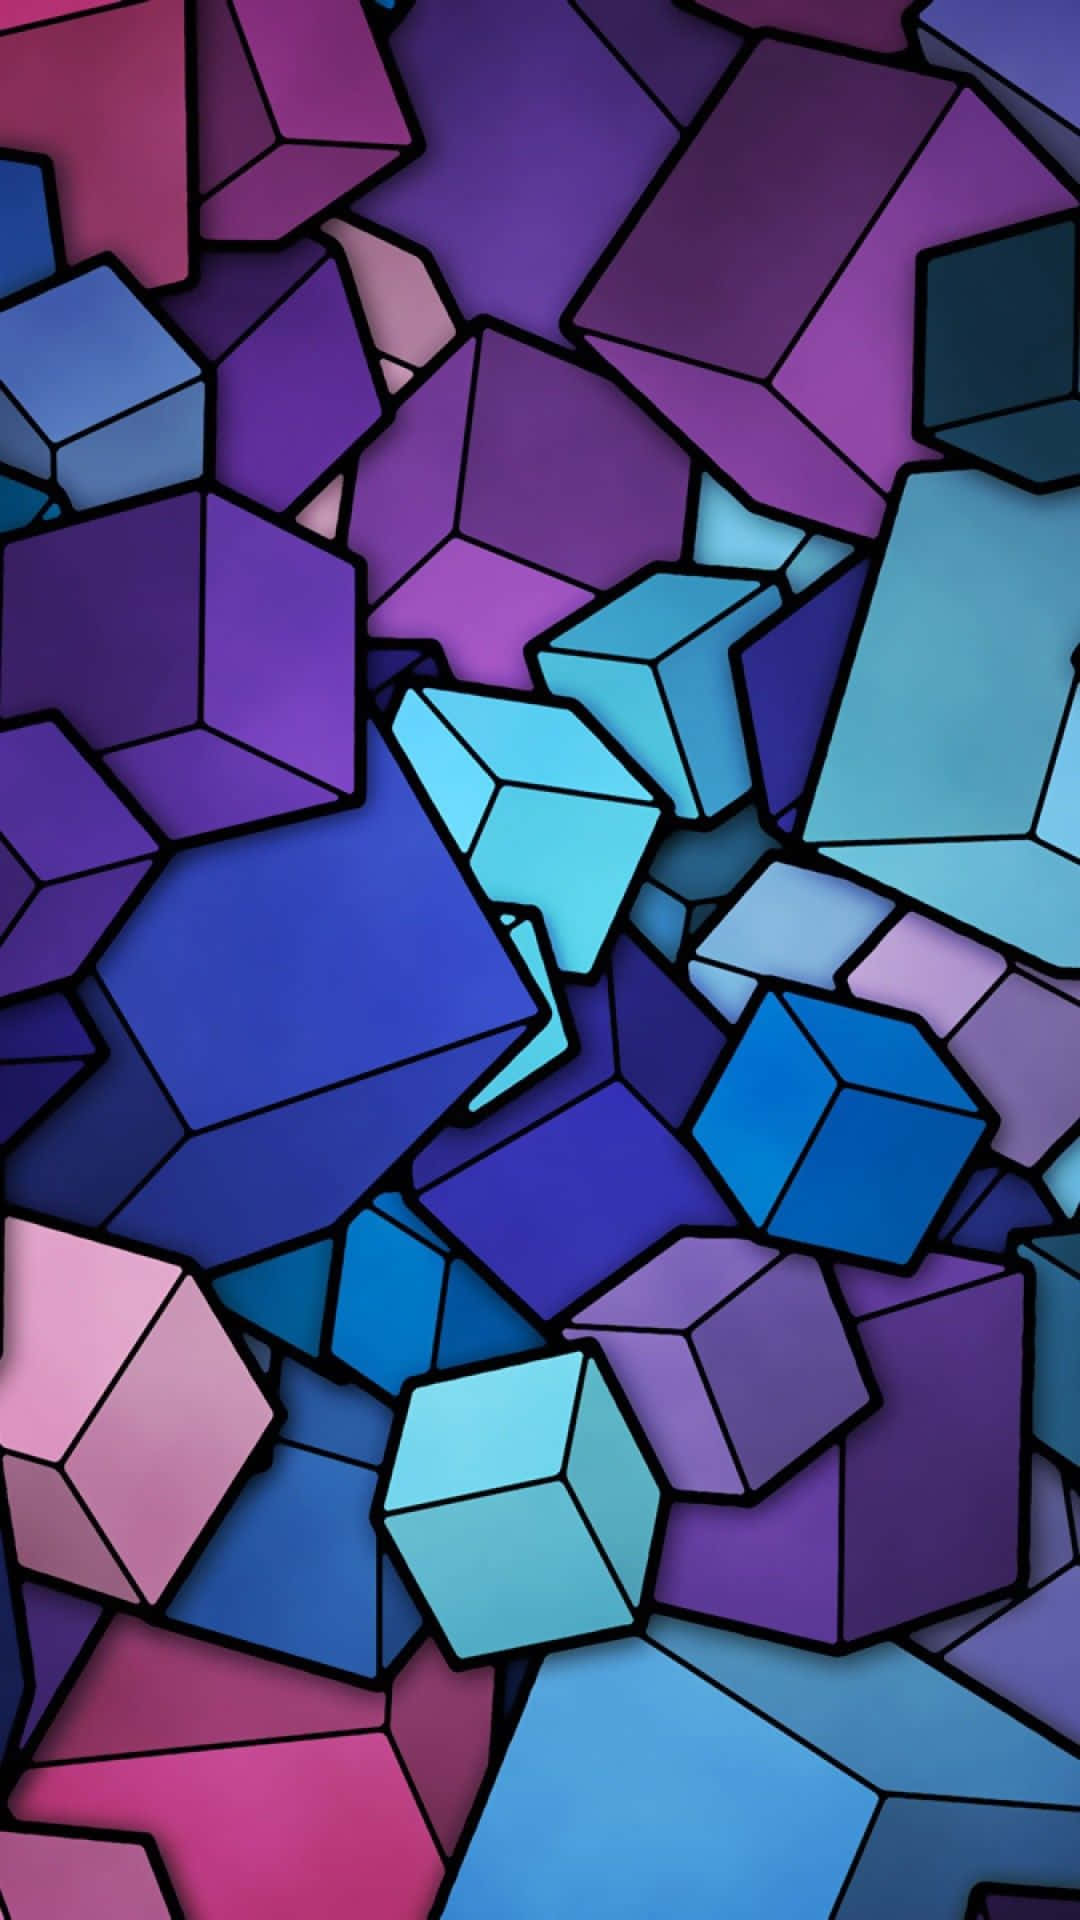 Cubes Art In Hd Abstract Phone Wallpaper